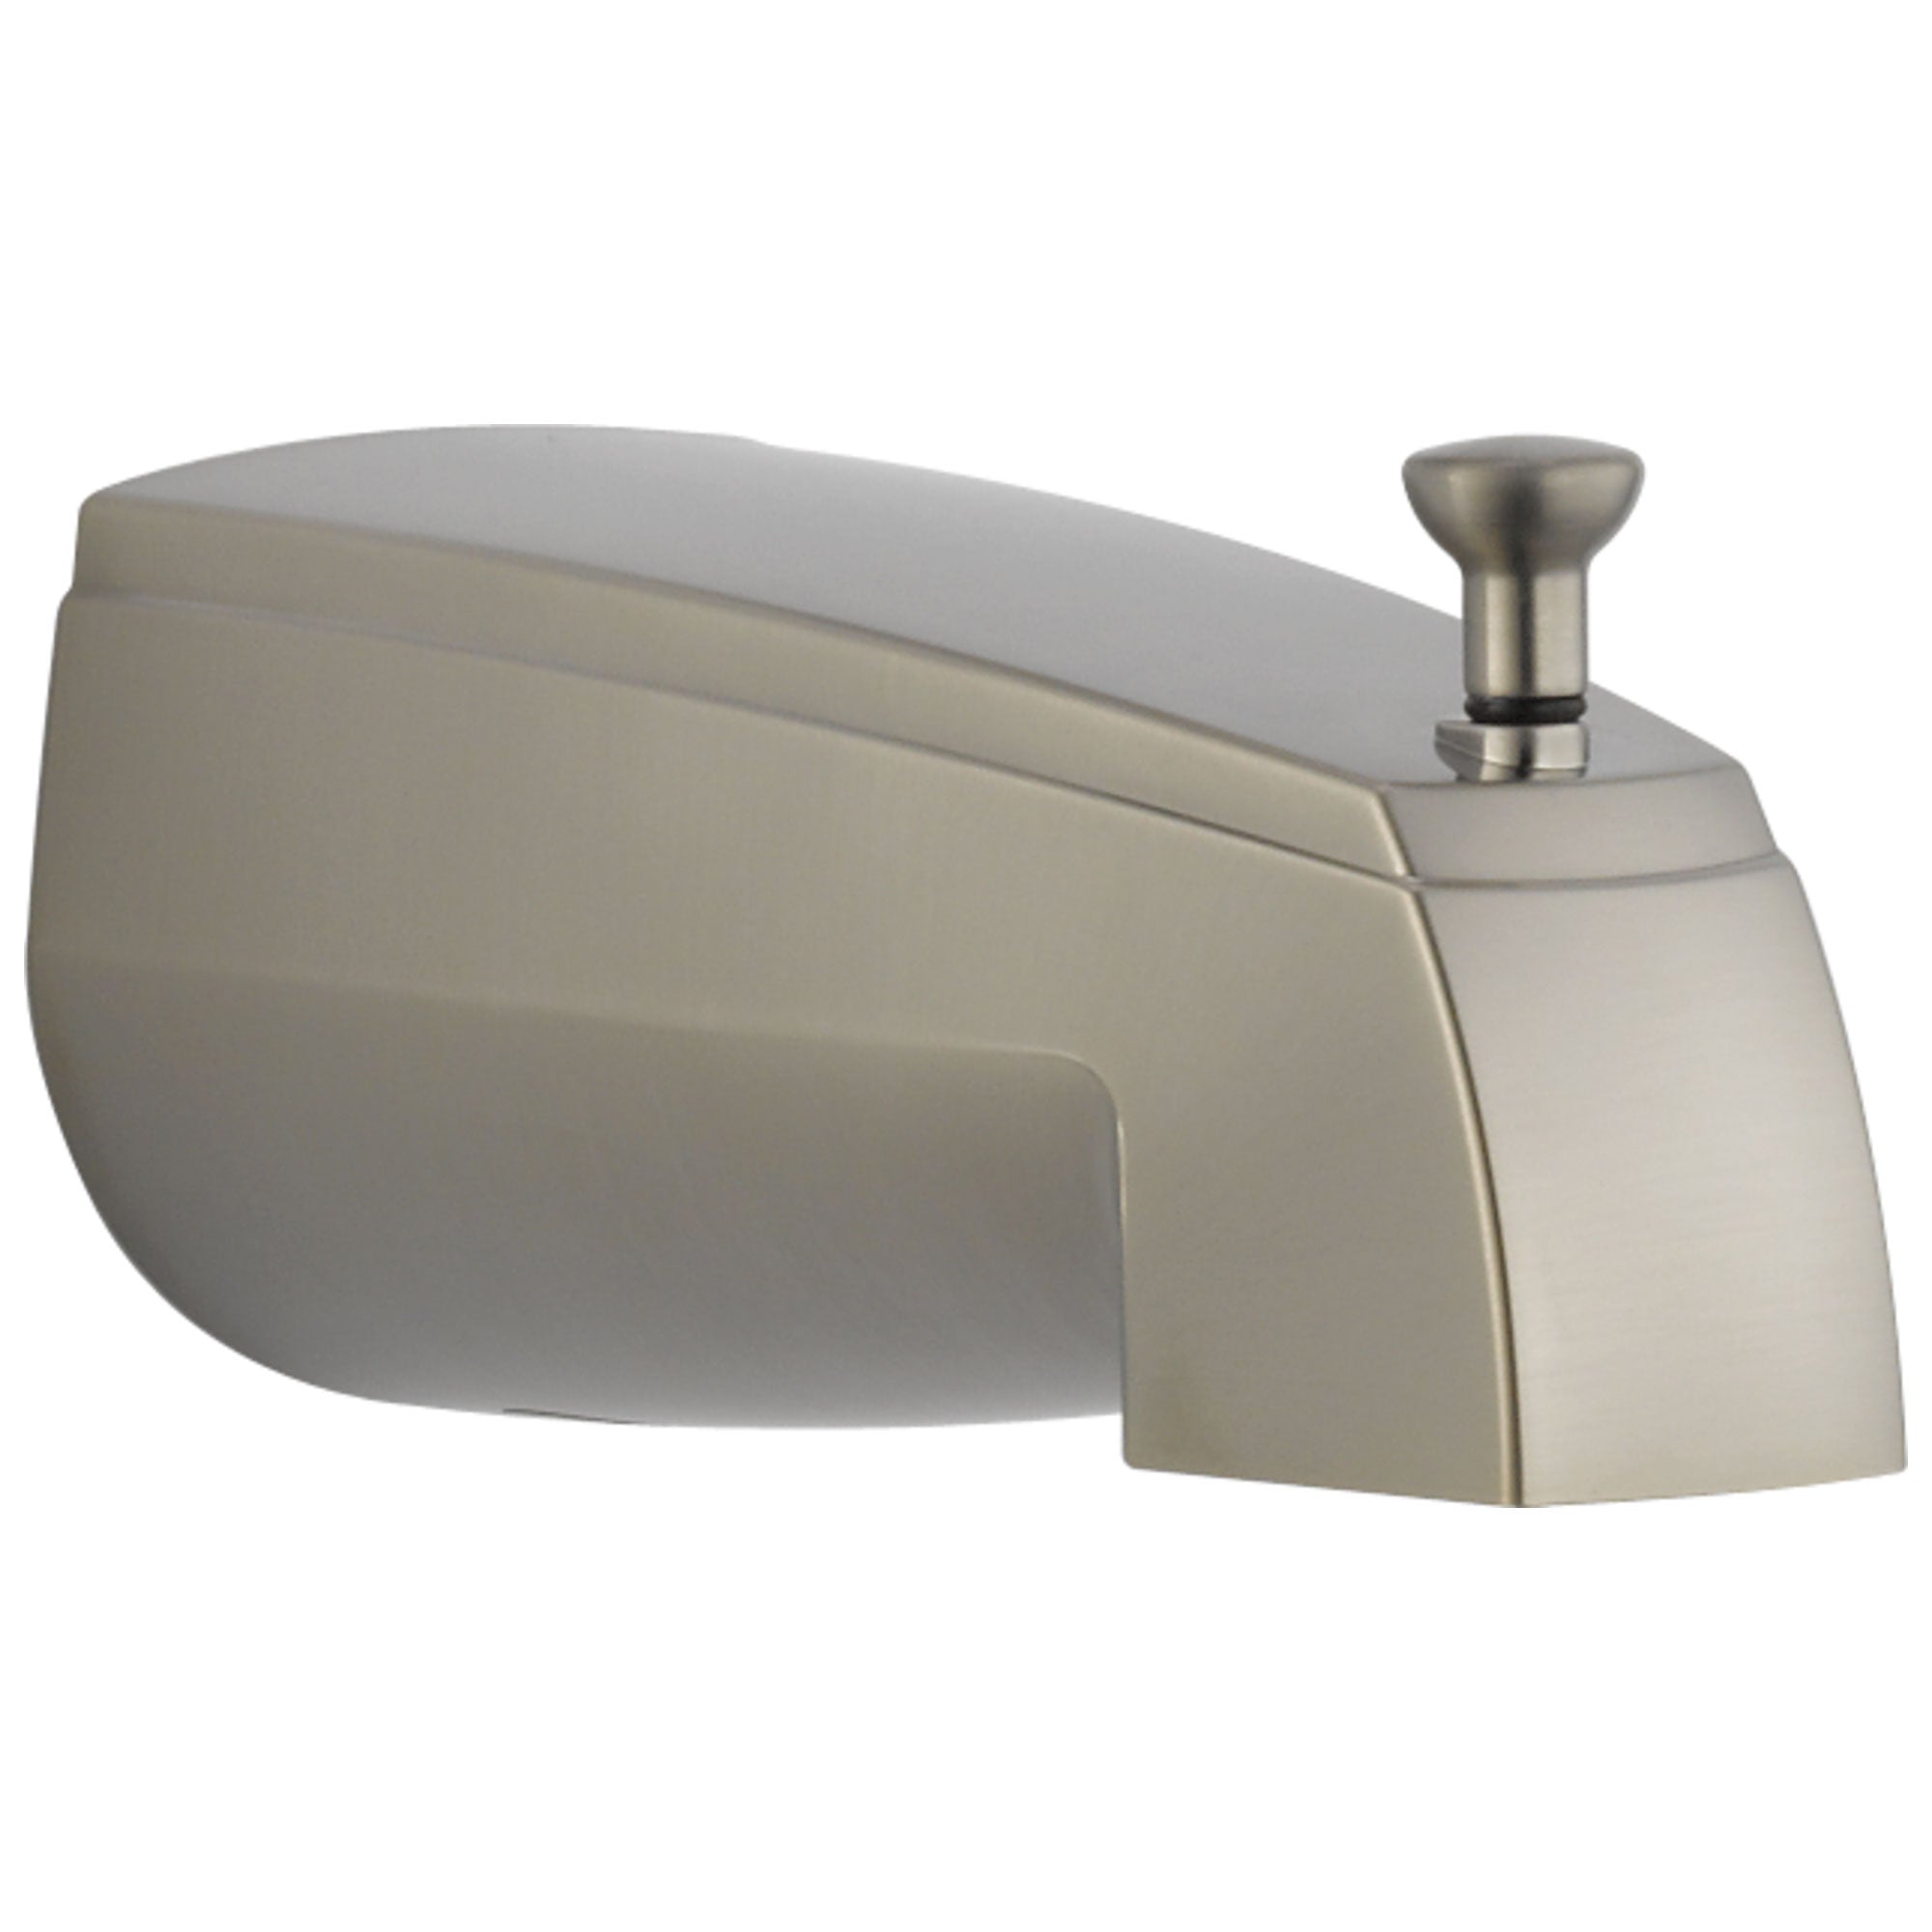 Delta Stainless Steel Finish Tub Spout with Pull-Up Diverter DRP5834SS